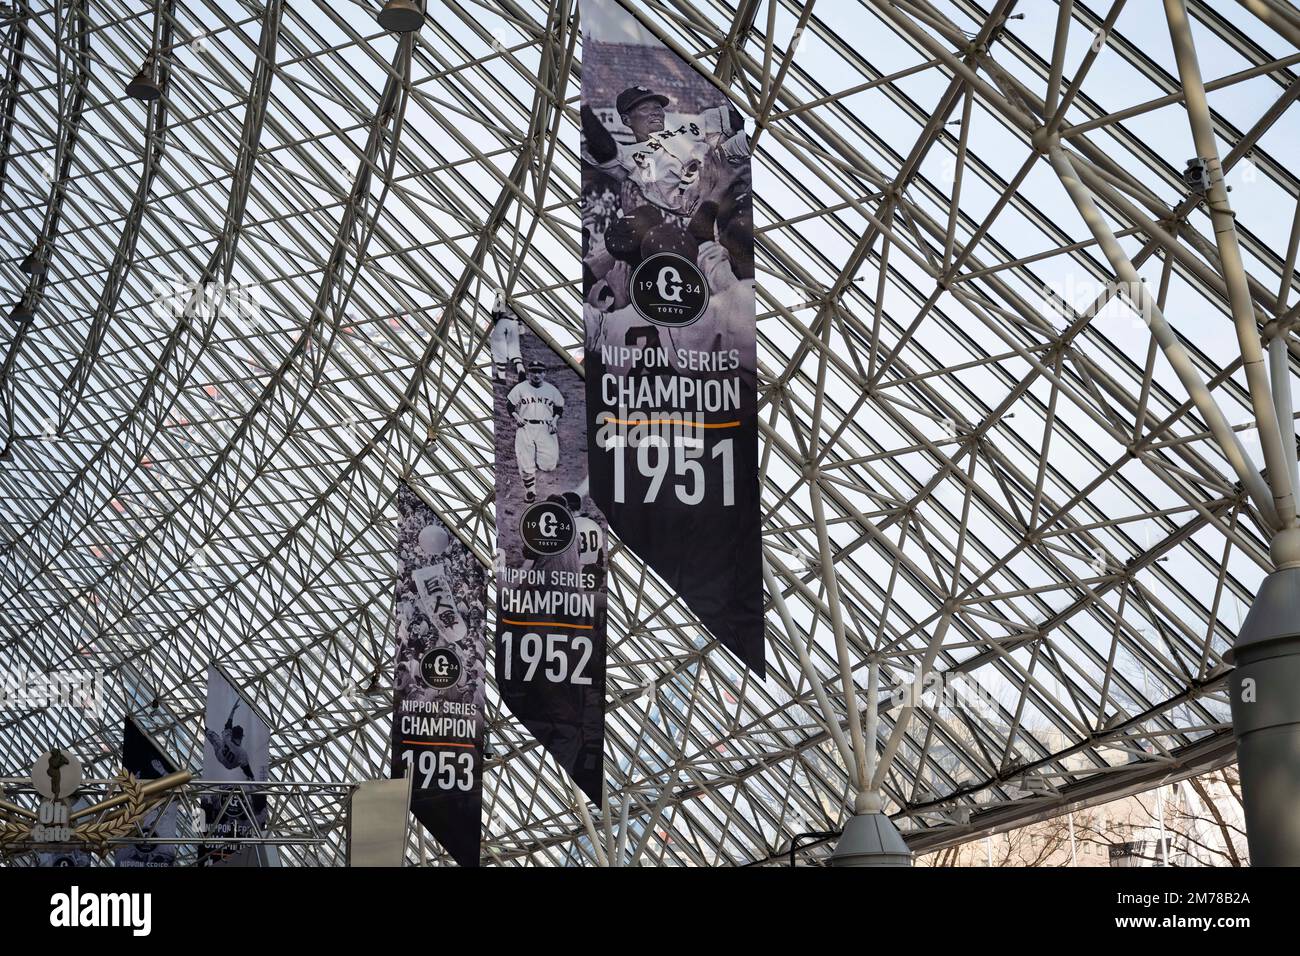 Tokyo, Japan. 6th Jan, 2023. Banners of Nippon Championships won by the Yomiuri Giants at the Tokyo Dome on an off-season day.The Tokyo Dome is a multi-purpose stadium dome roofed indoor stadium. It was completed in 1988 and has a capacity of 55,000 people. The dome has a retractable roof, making it suitable for hosting both indoor and outdoor events. It is the home of the Yomiuri Giants, a professional baseball team in the Nippon Professional Baseball, and is also used for concerts, exhibitions, and other sporting events. It is a popular tourist attraction and offers a variety of ameniti Stock Photo